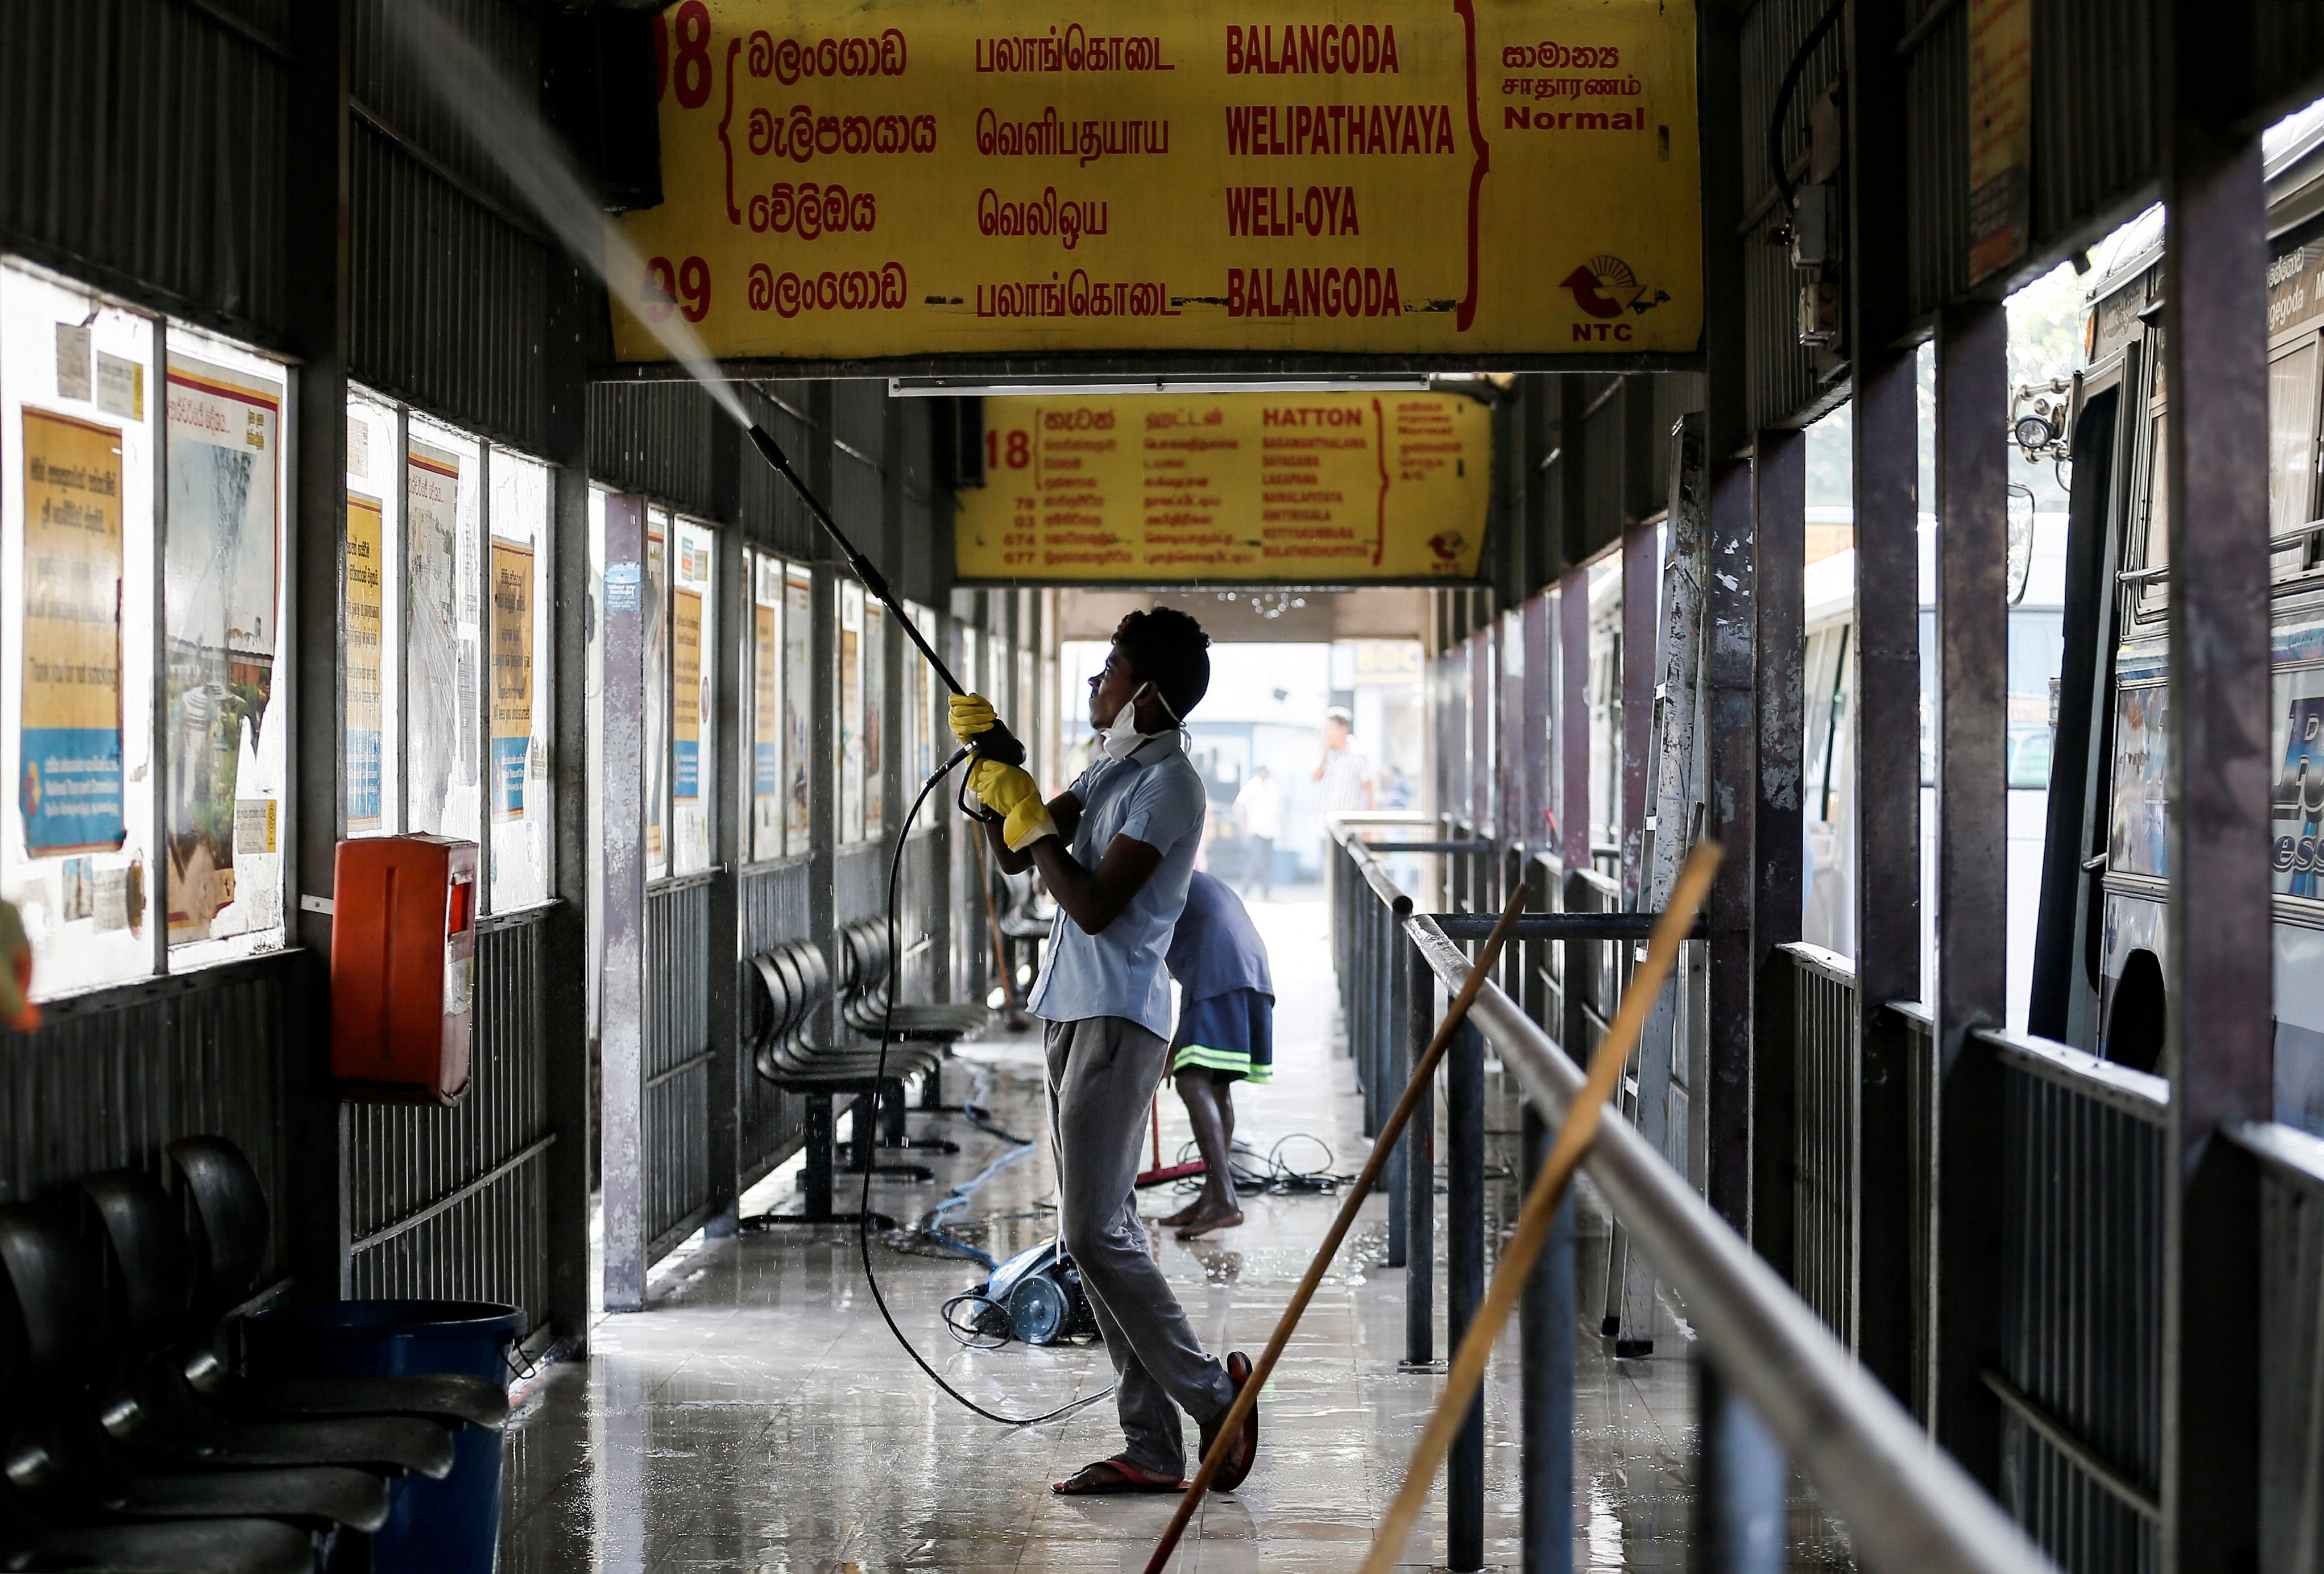 A worker cleans a private bus station, as the number of people tested positive for coronavirus (COVID-19) in the country increases to 18, in Colombo, Sri Lanka. (Reuters photo)